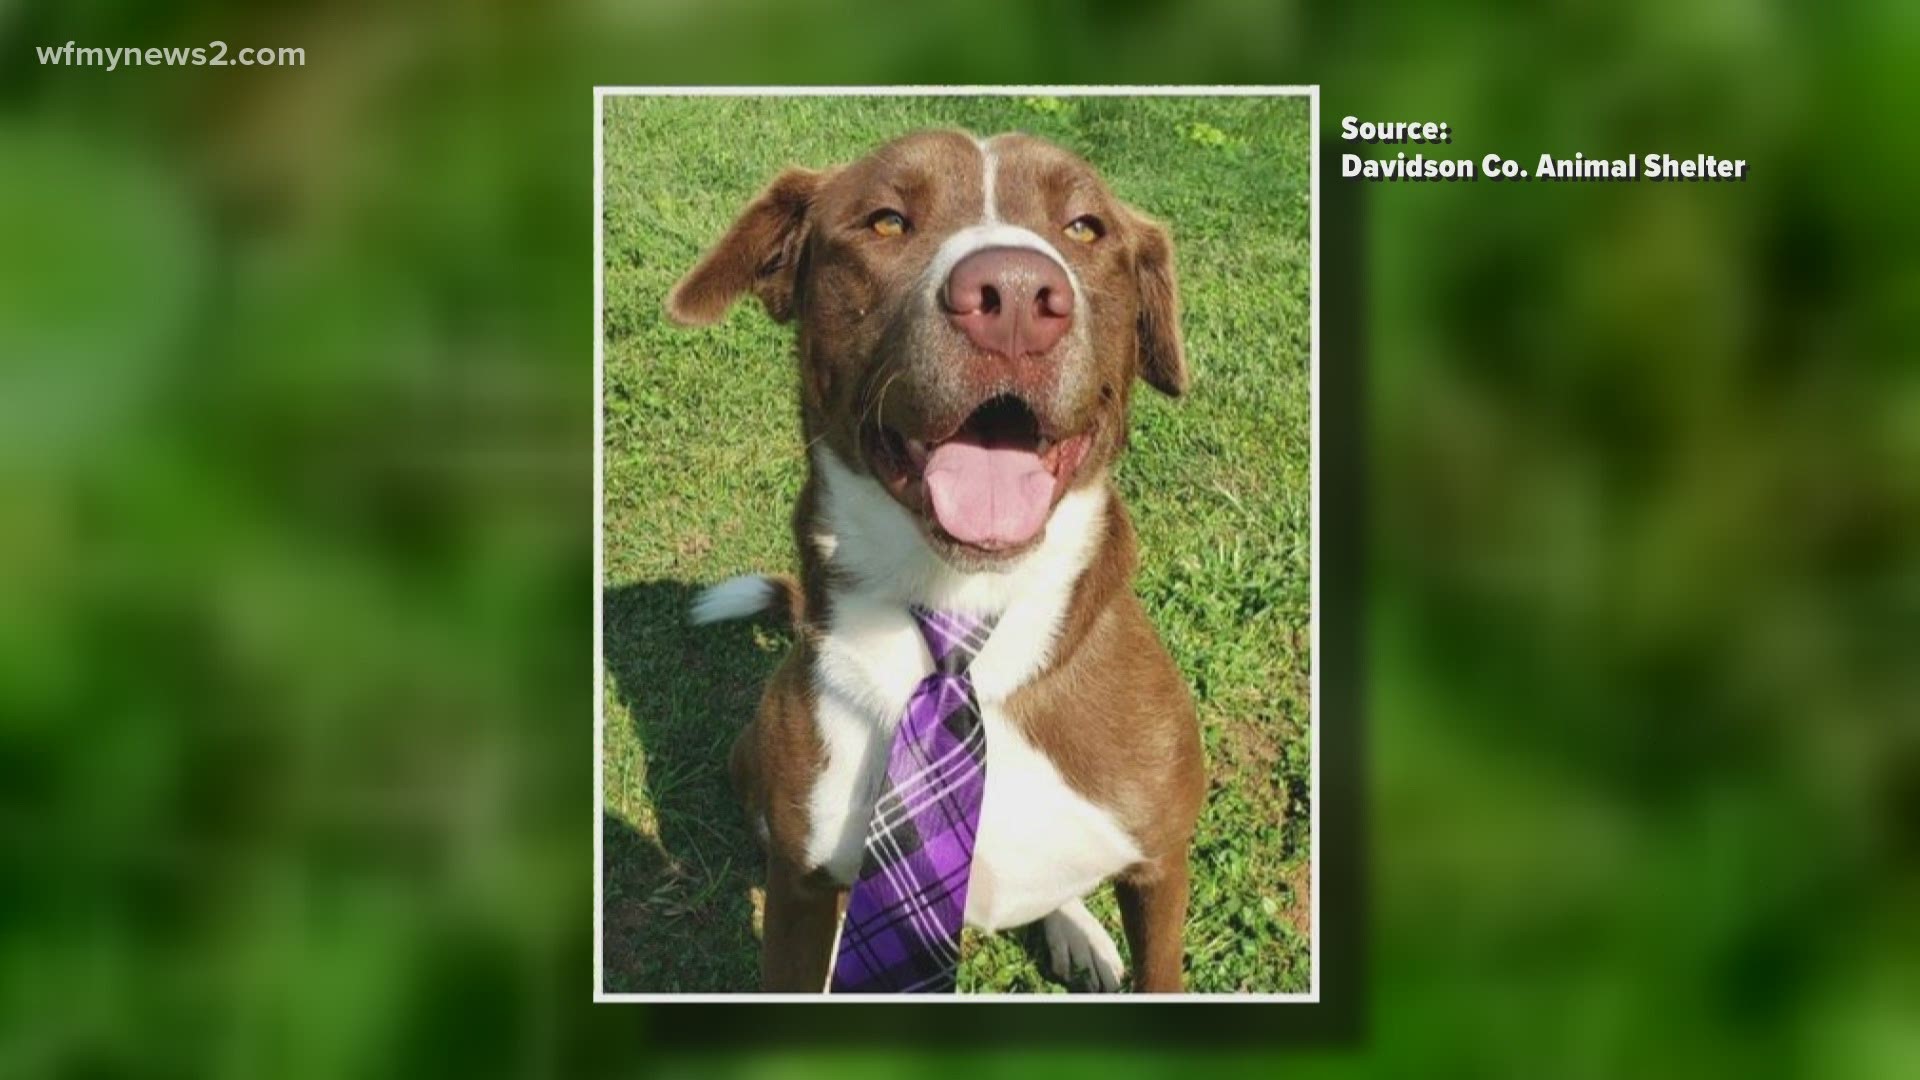 This energetic lab mix is currently at the Davidson Co. animal shelter. Help us find him his forever home!